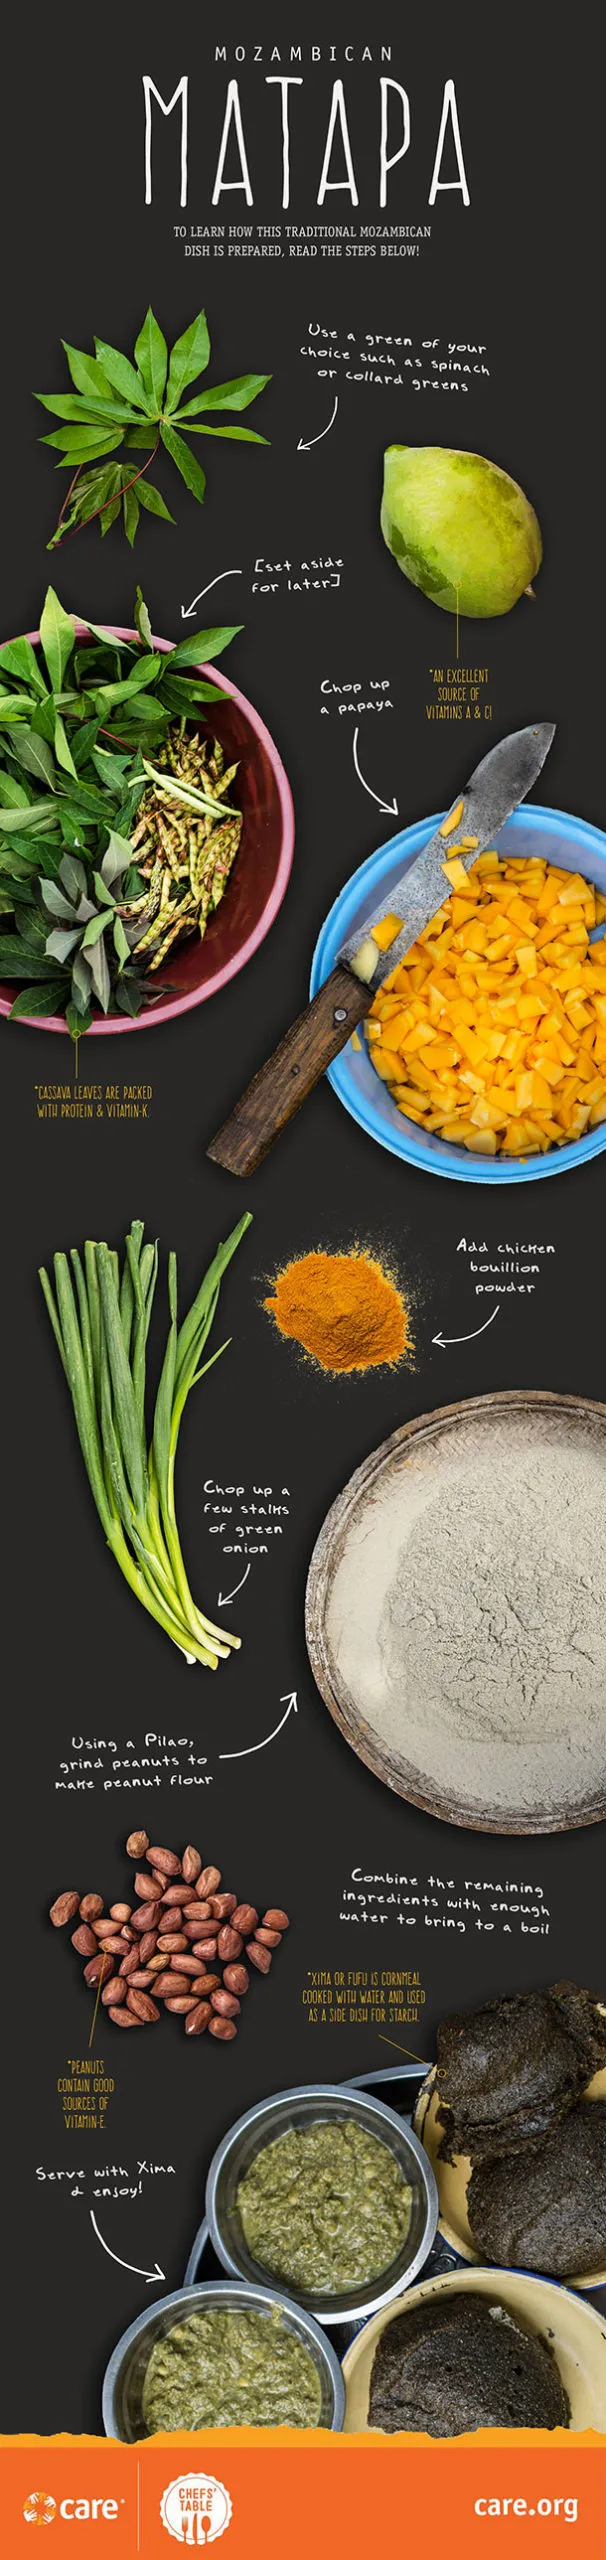 A graphic featuring ingredients and instructions to make Mozambican matapa.